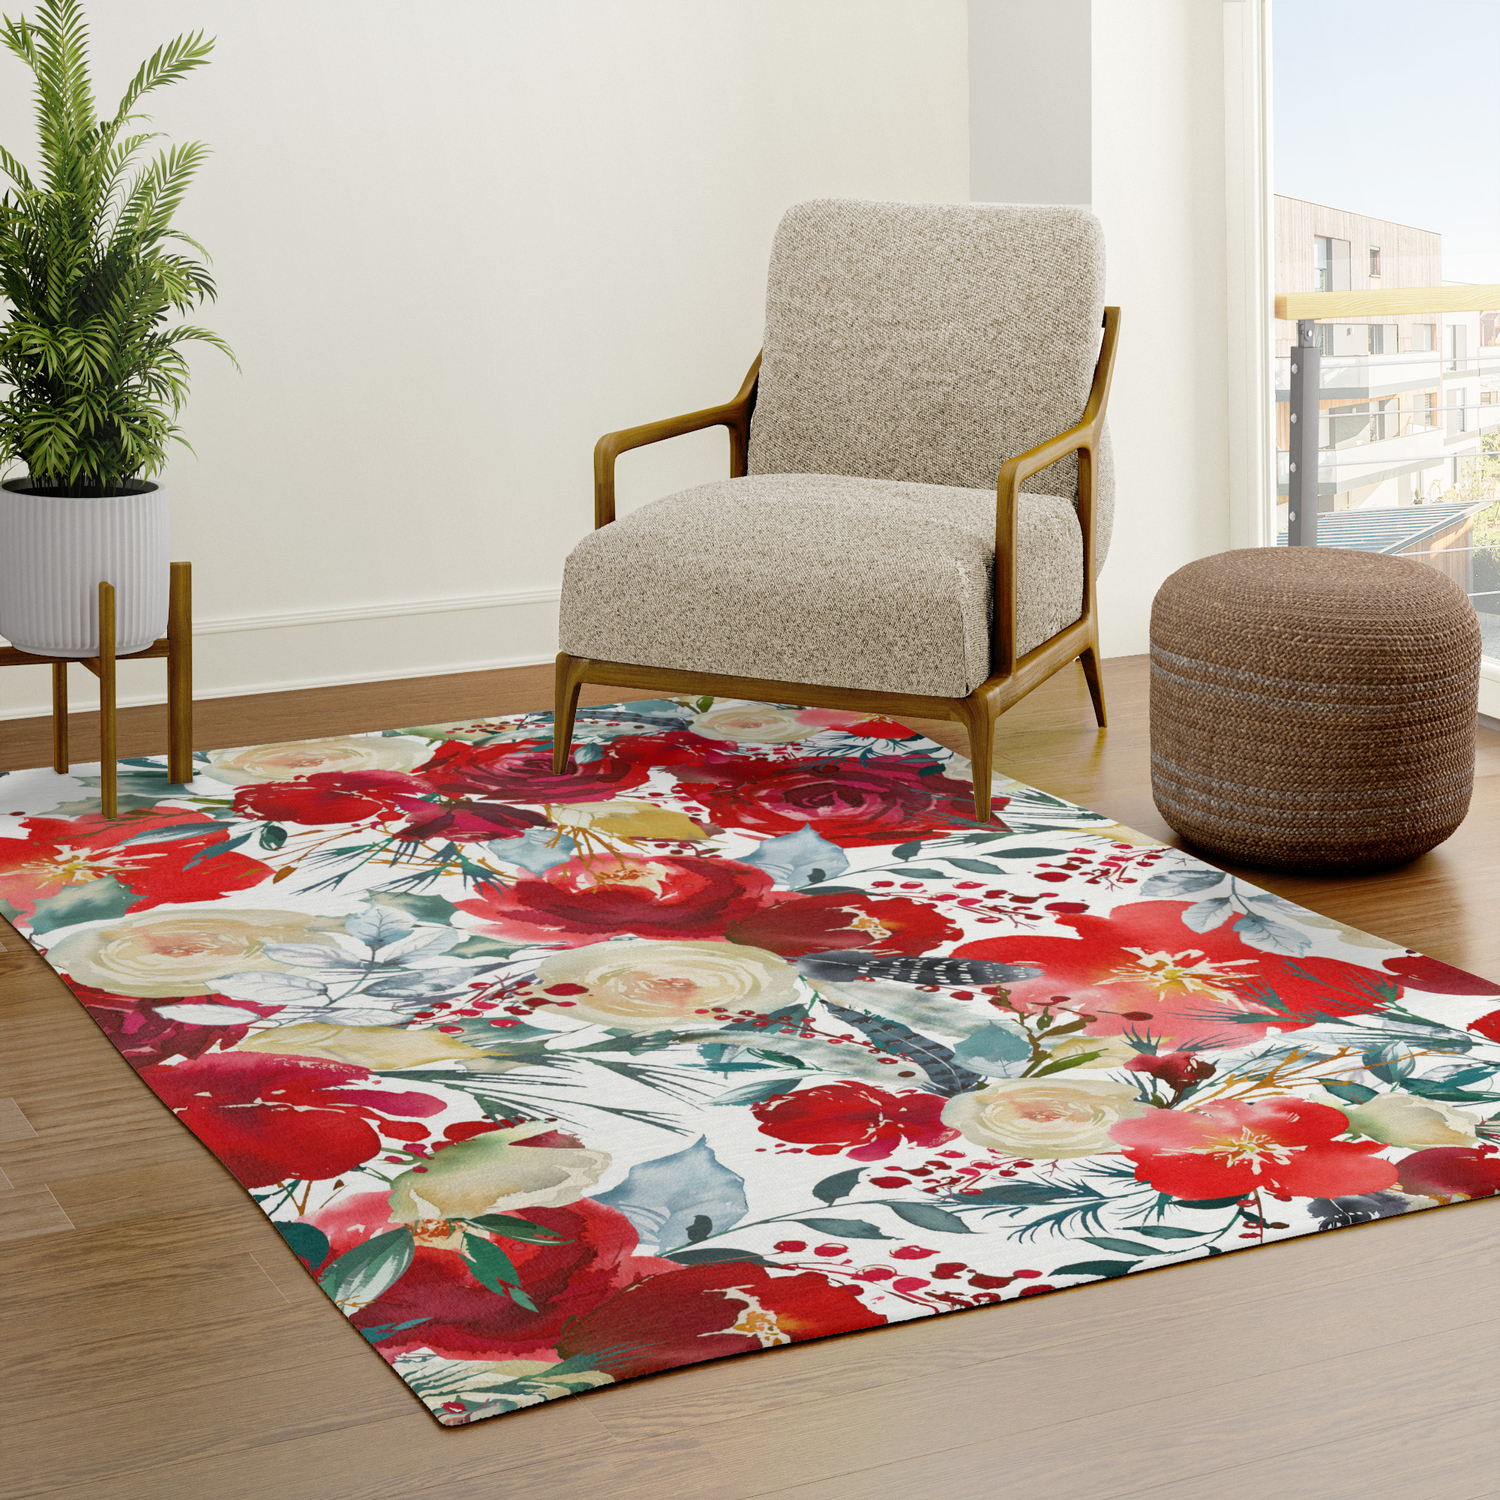 Red Teal Hand Painted Boho Watercolor, Red And Teal Rugs